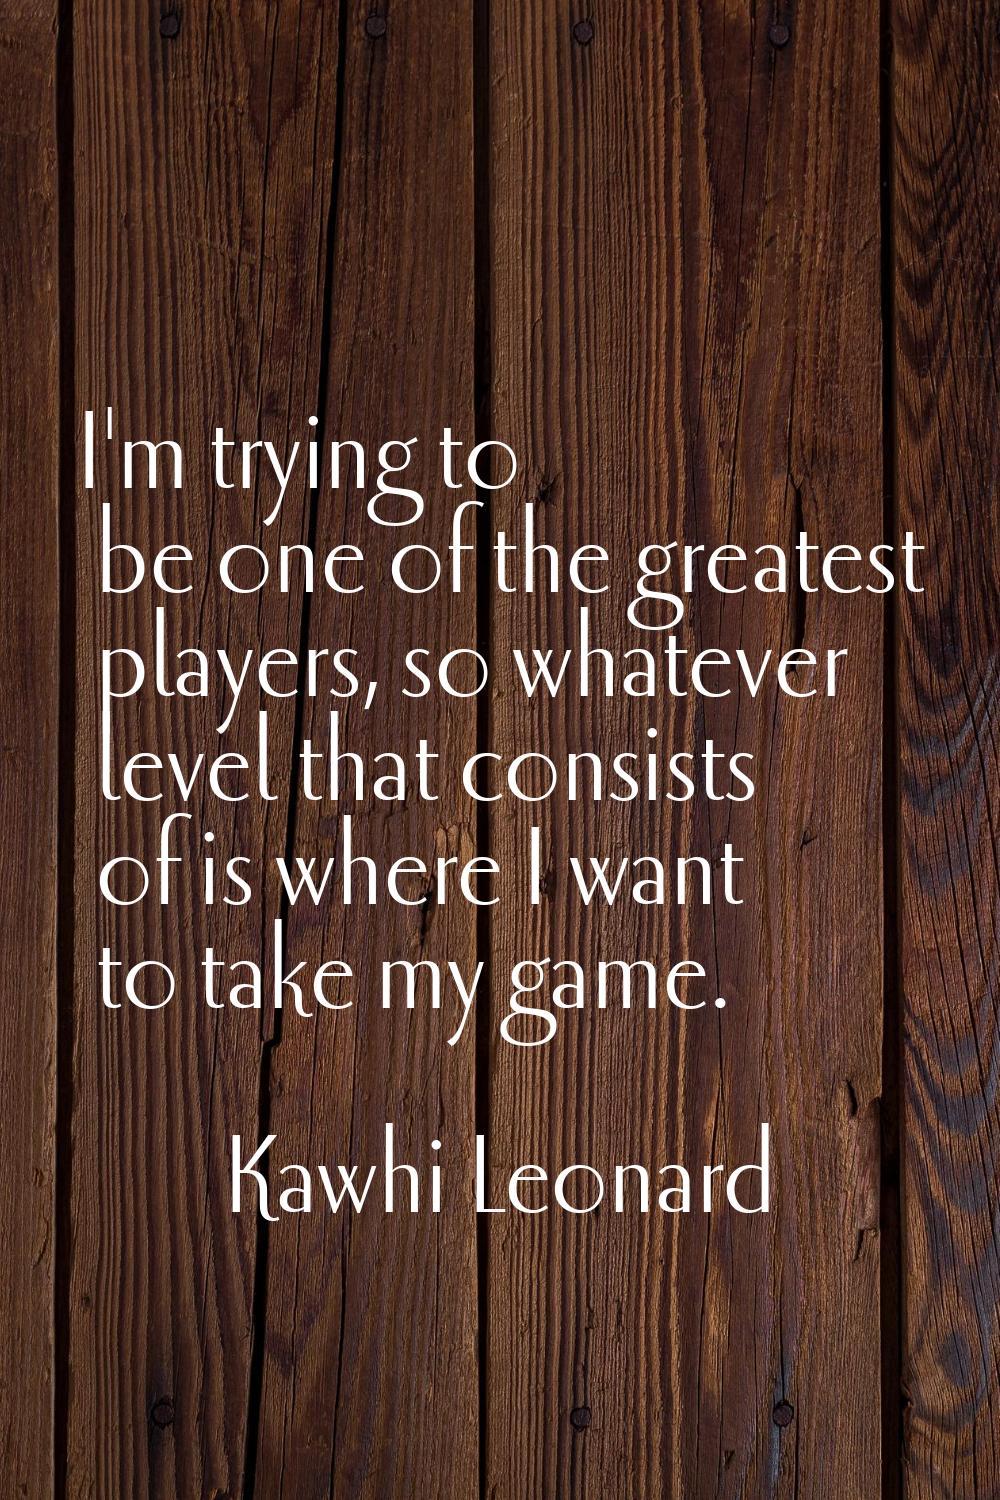 I'm trying to be one of the greatest players, so whatever level that consists of is where I want to